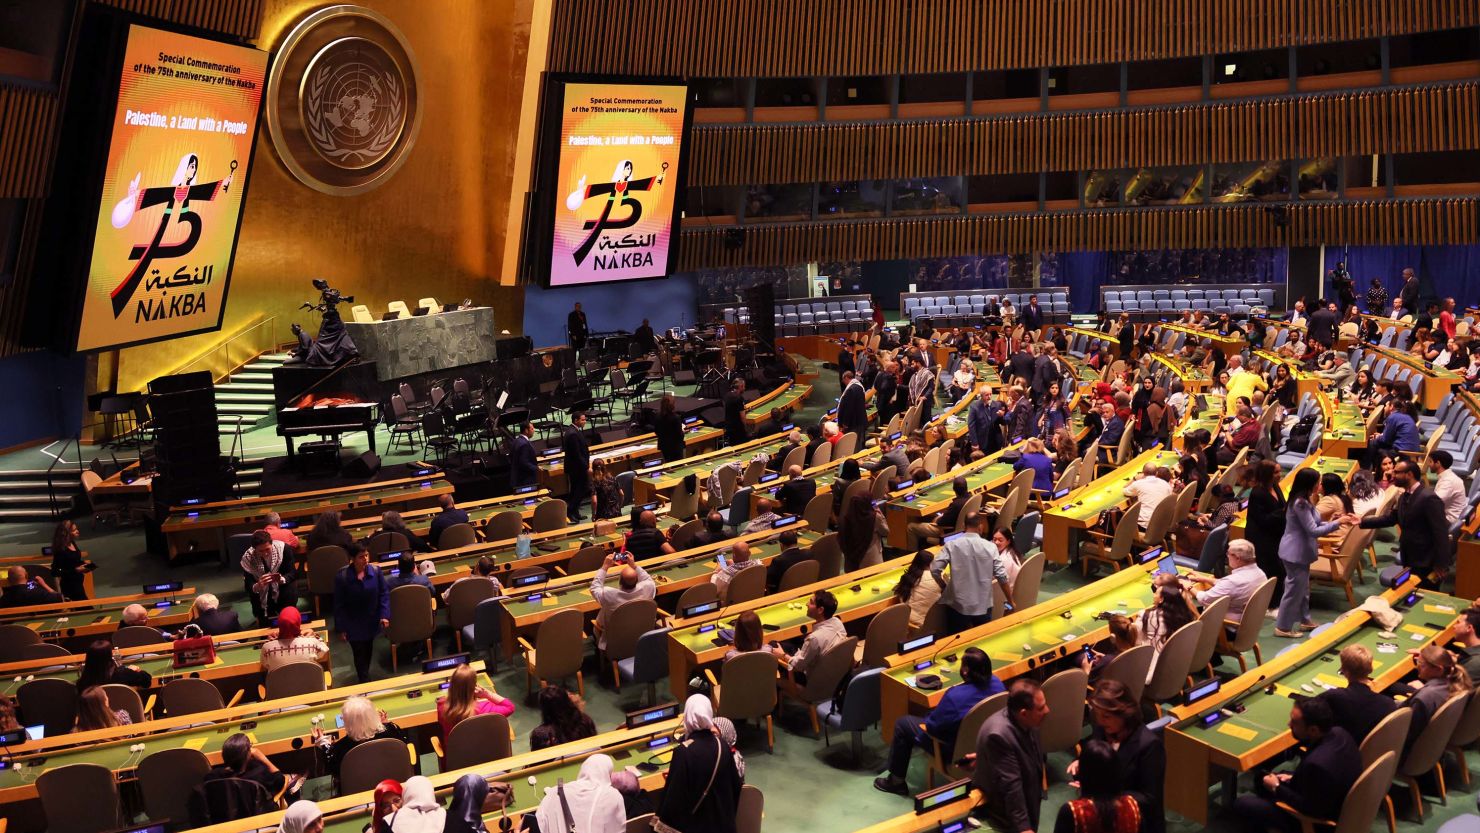 People attend an observation of the 75th anniversary of the Nakba in the General Assembly Hall at the United Nations on Monday in New York City. 